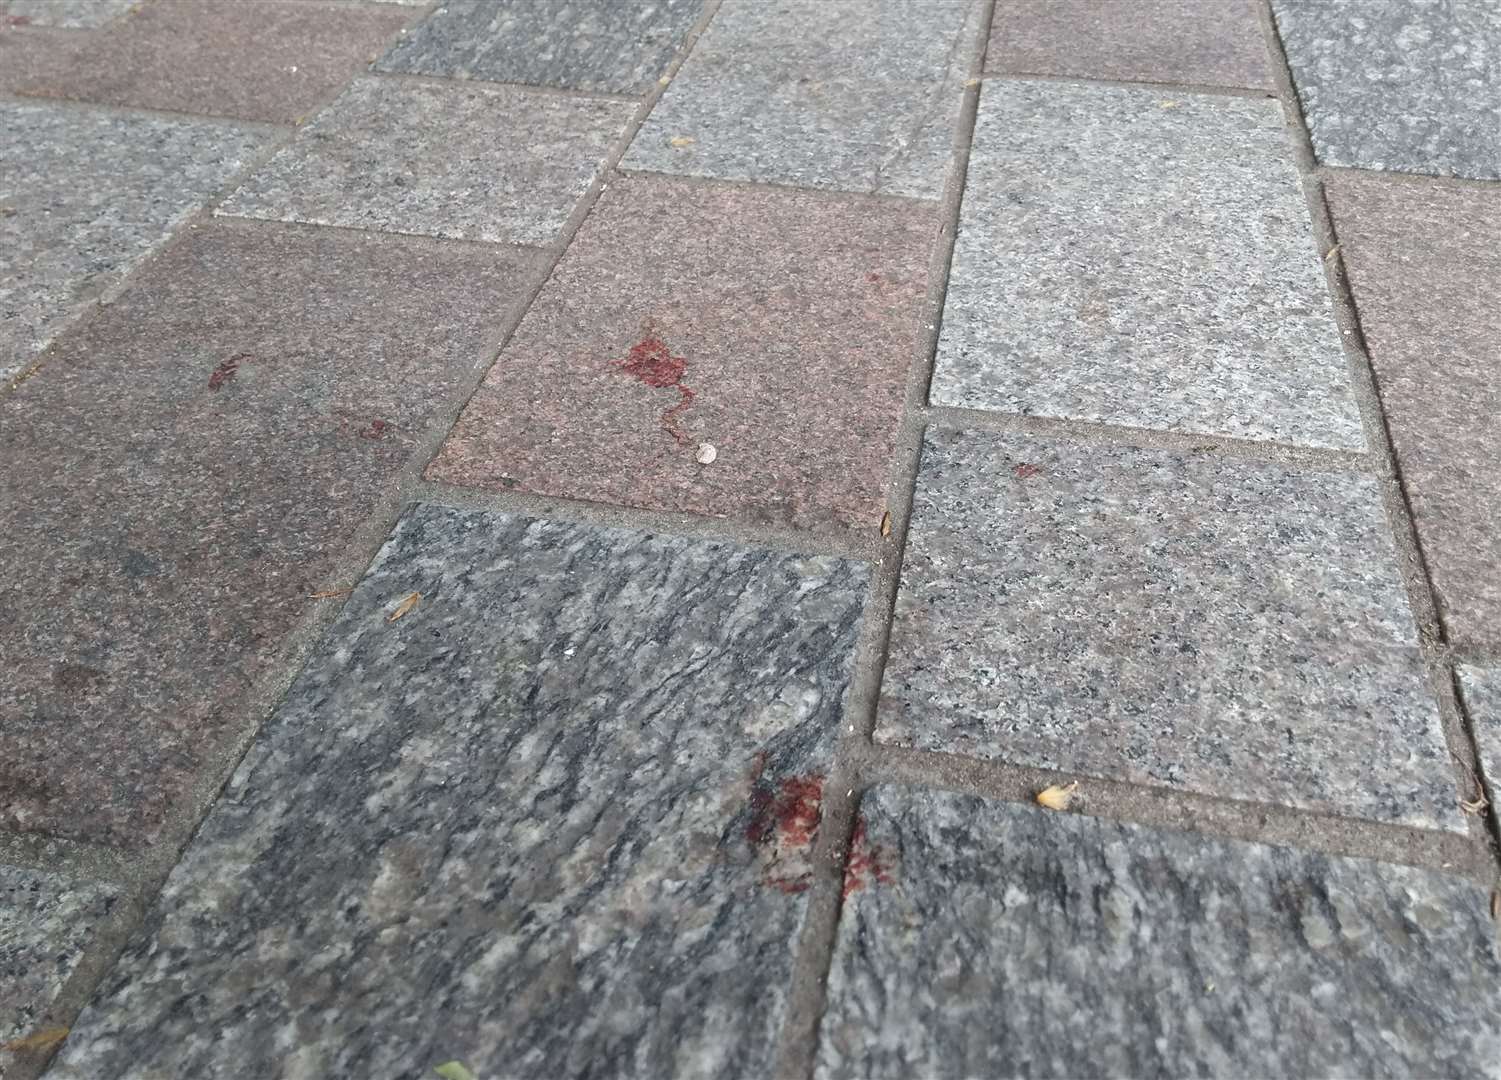 Blood at the scene of as assault in Remembrance Square, Maidstone